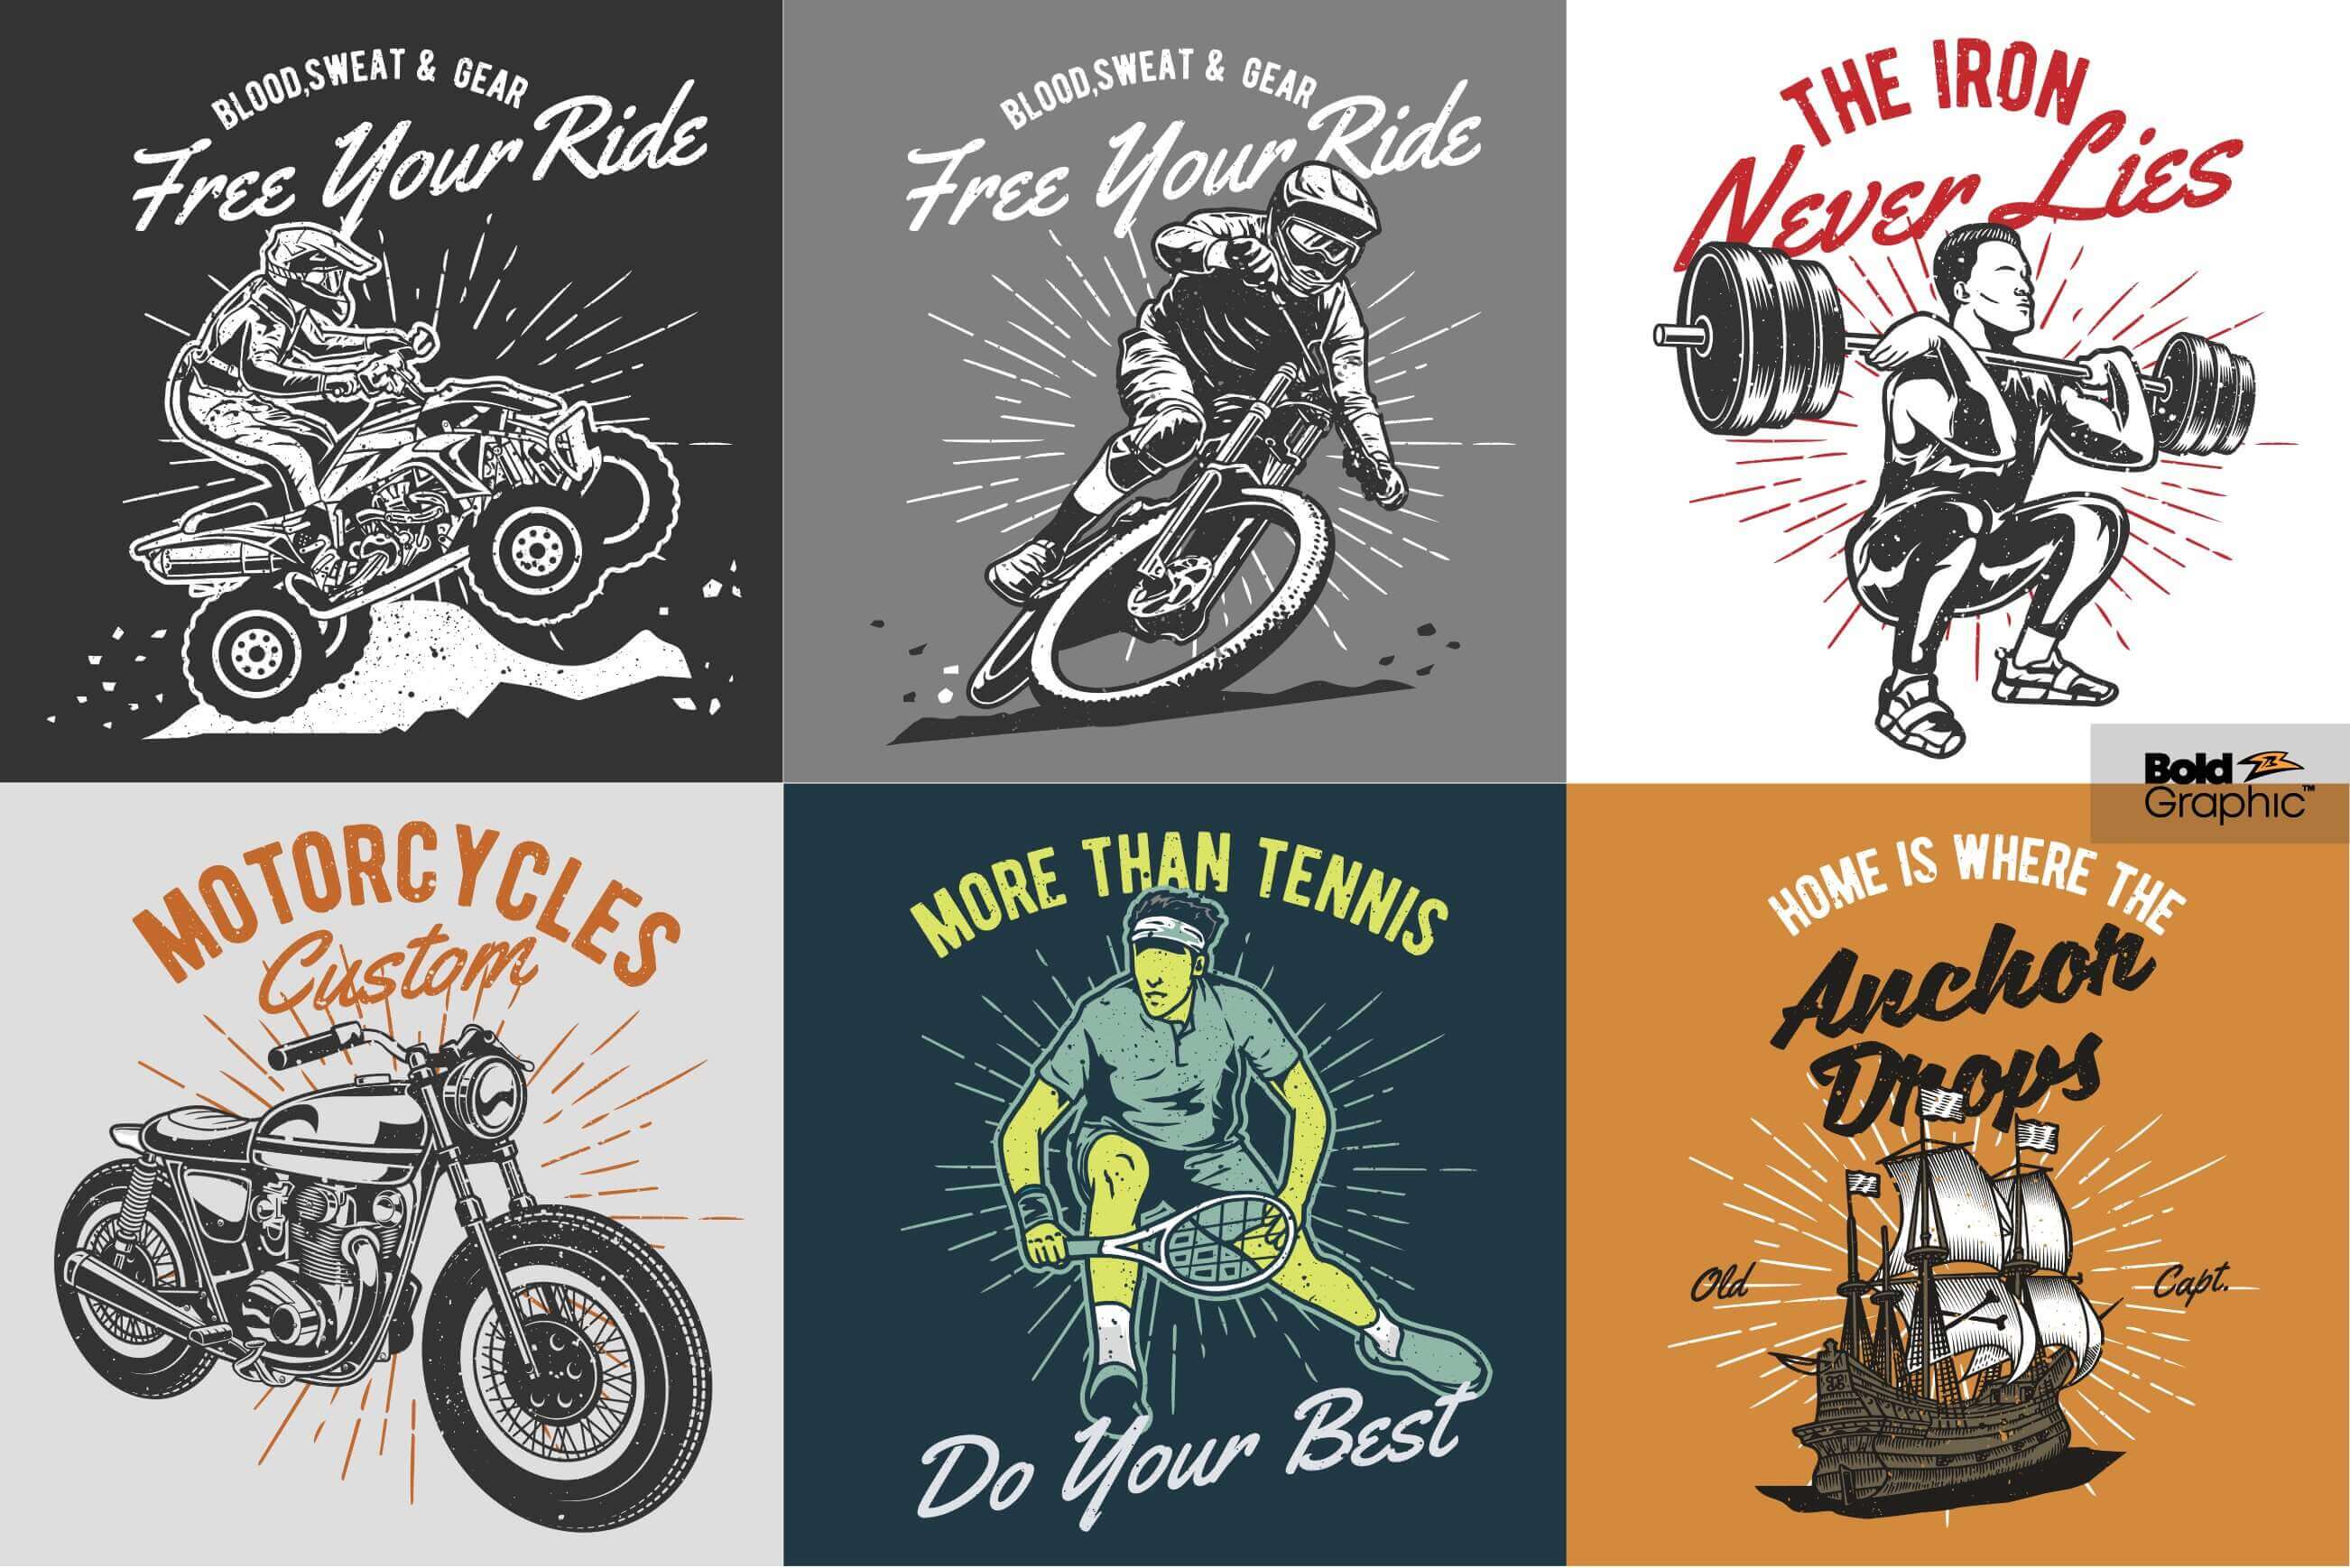 Inscriptions on sporty prints: Blood sweat & gear Free Your Ride, The iron never lies.